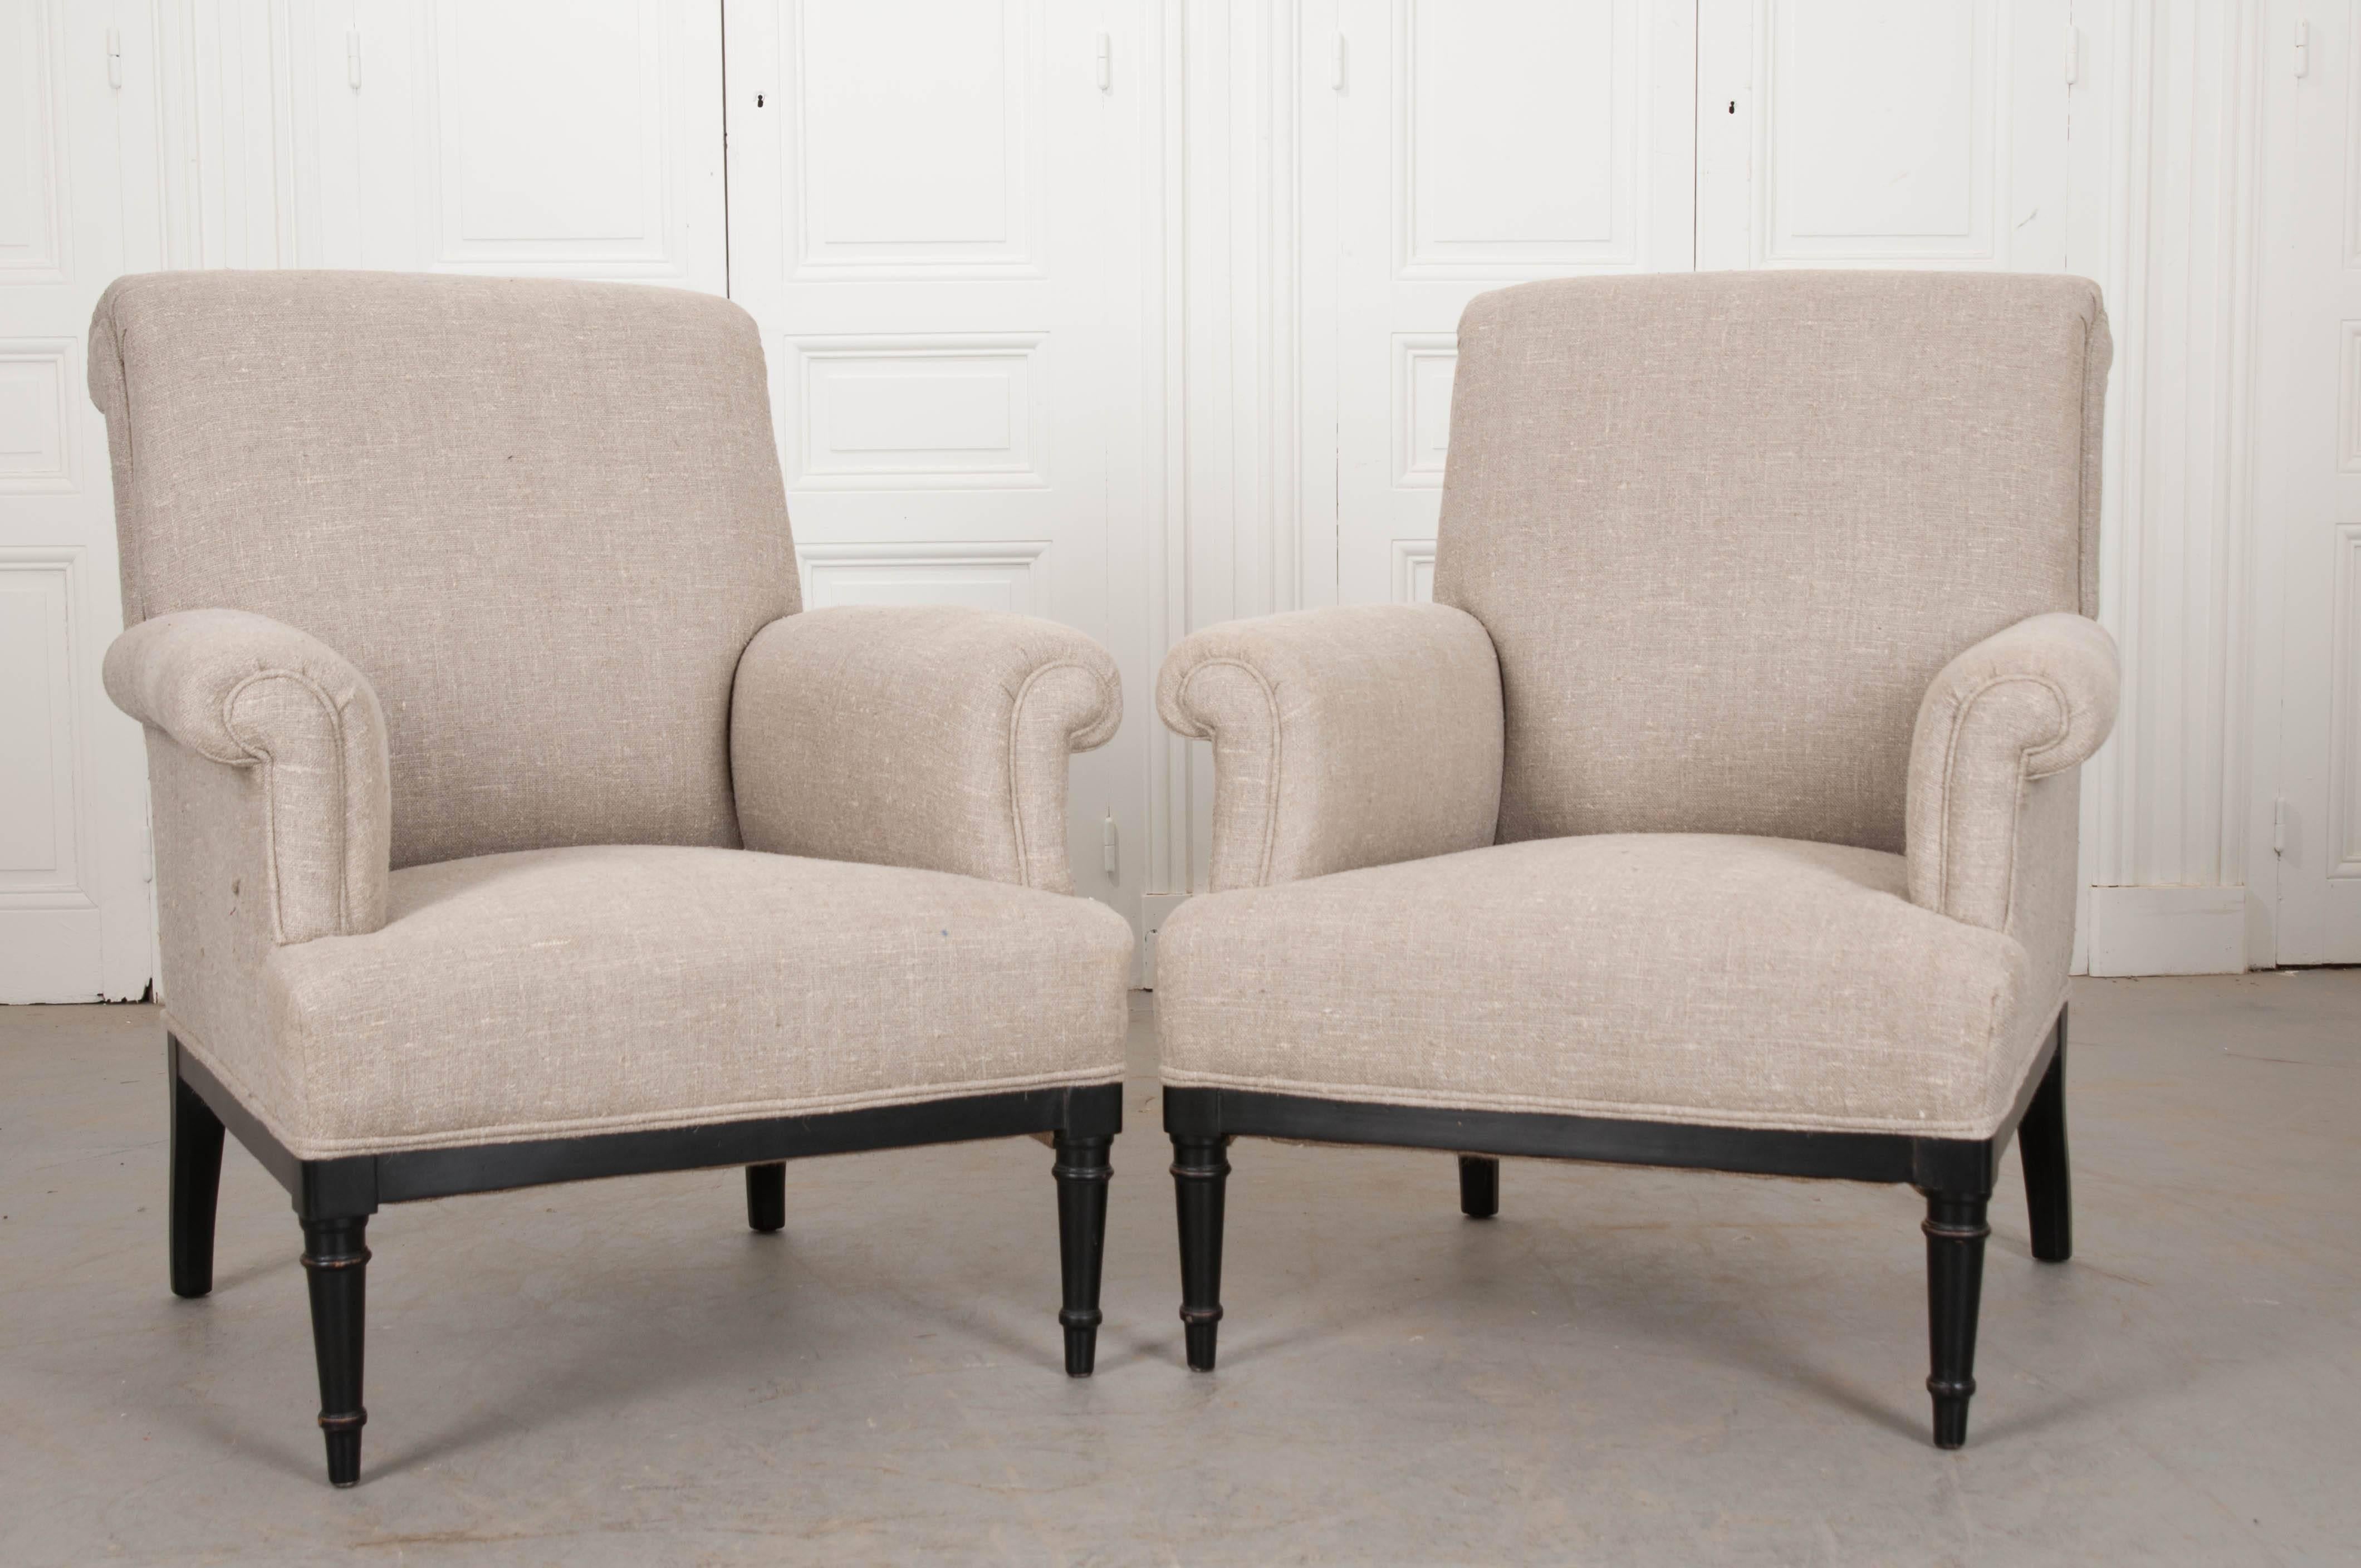 This fabulous pair of 19th century French bergères has been recently reupholstered in a neutral slubby linen. The pair have a classic design with rolled backs and arms and double welt cording where the upholstery meets the ebony base. The base has